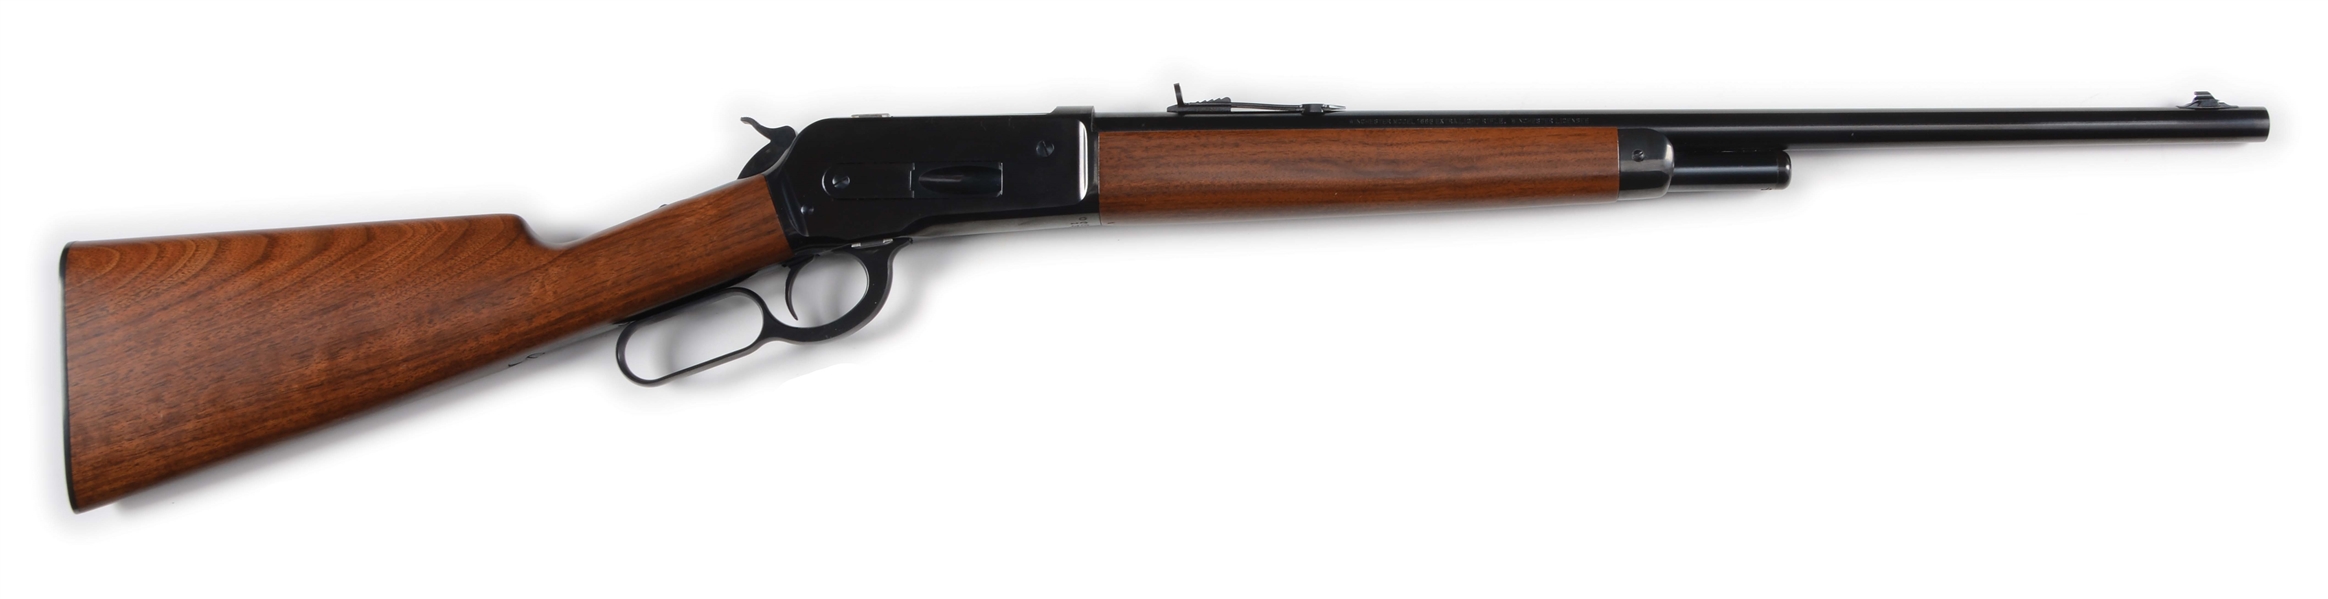 (M) NEAR NEW WINCHESTER 1886 LEVER ACTION RIFLE (MODERN).